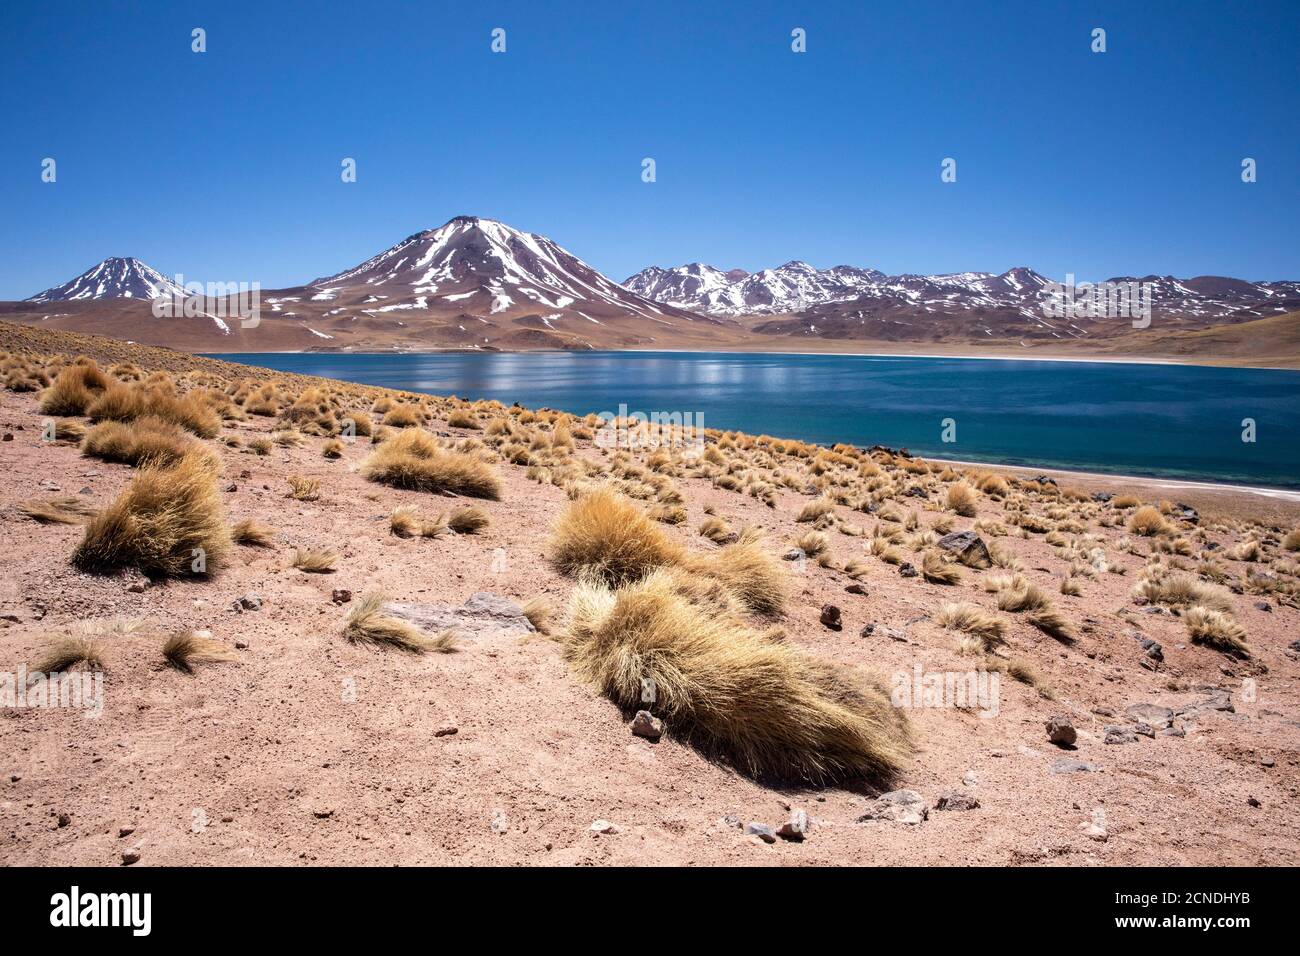 Laguna Miscanti, a brackish lake at an altitude of 4140 meters in the Andean Central Volcanic Zone, Chile Stock Photo